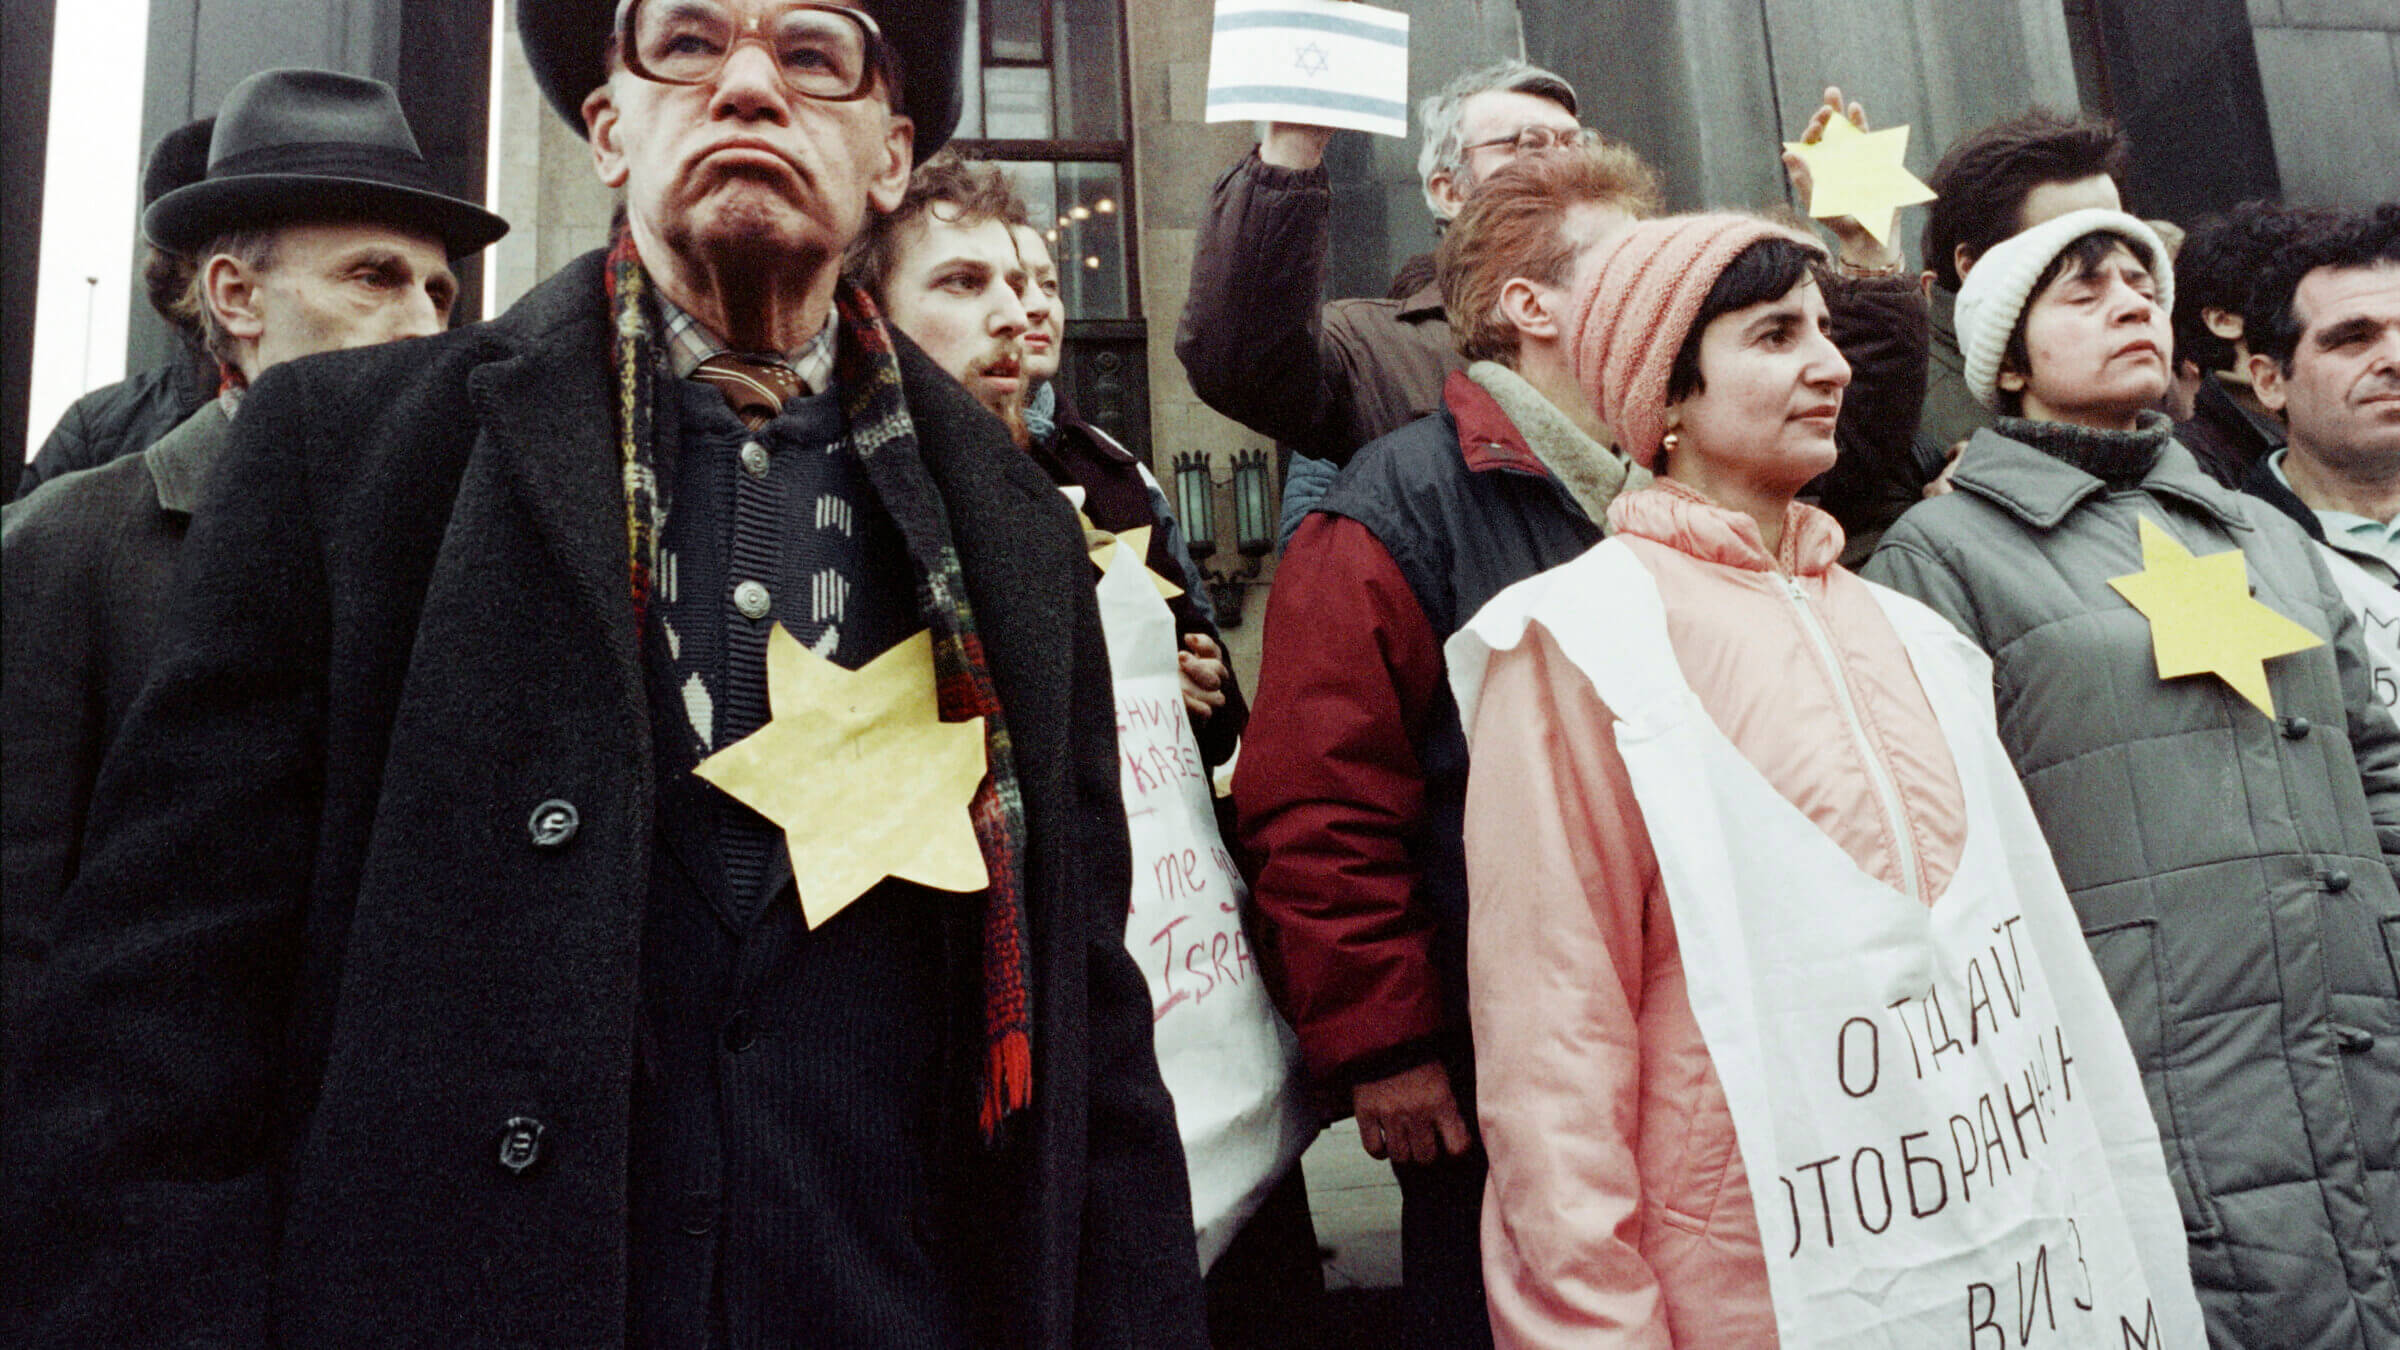 A Jewish demonstration in front of Moscow's Lenin's Library on April 14, 1988, the first day of the Gorbachev-Reagan summit. Some wear large yellow stars to draw attention on the situation of the Jewish people and refuseniks in the USSR